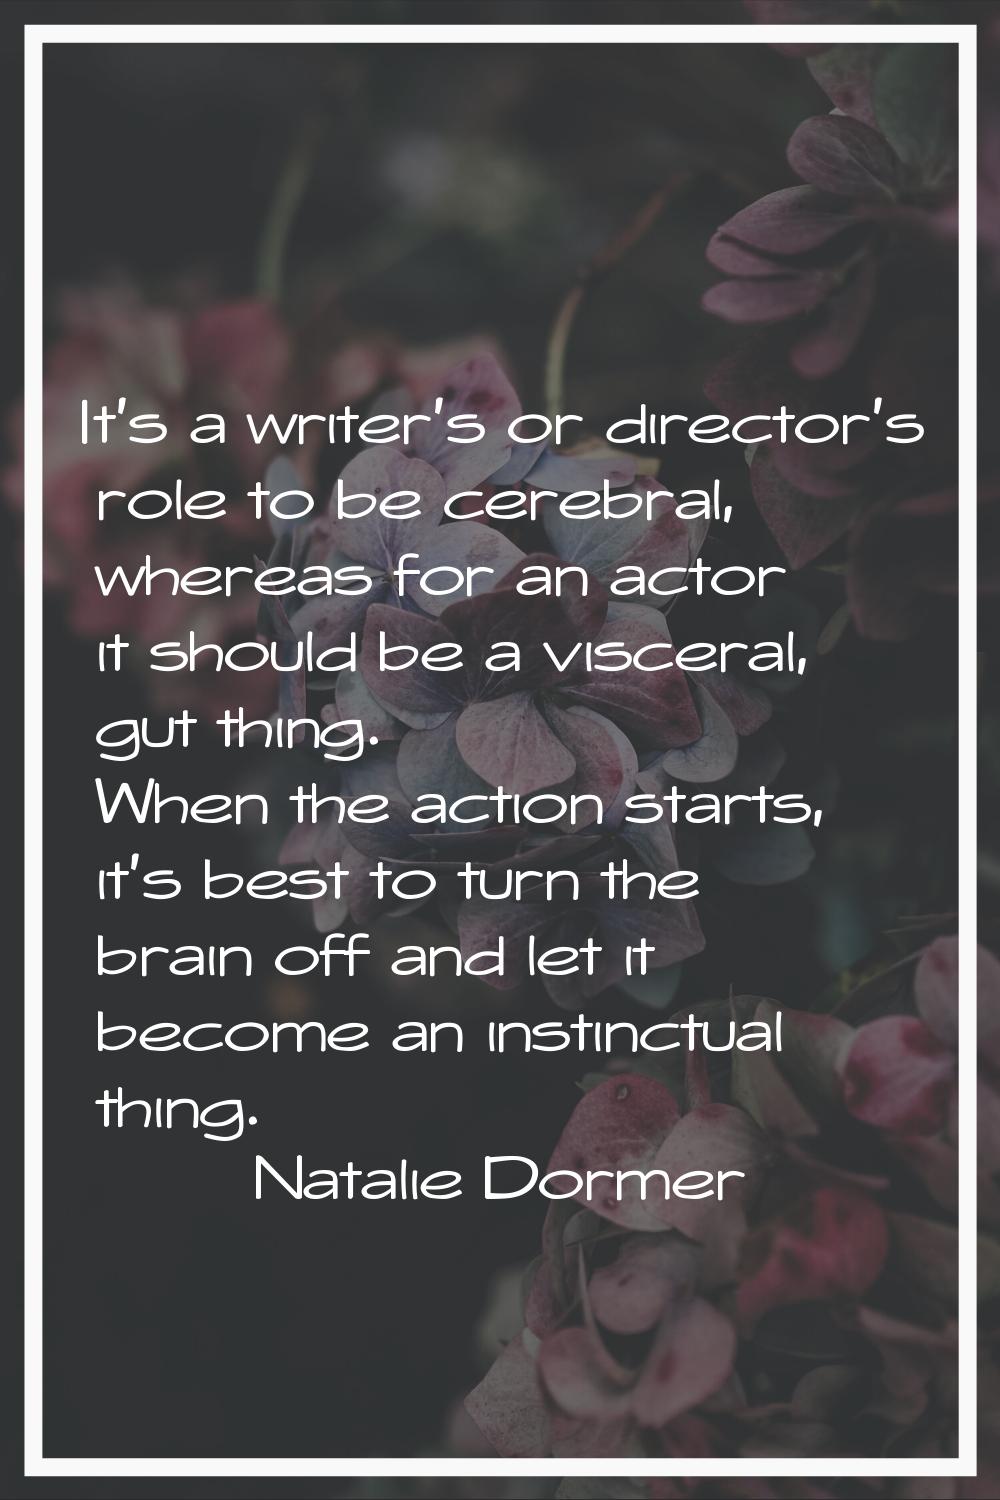 It's a writer's or director's role to be cerebral, whereas for an actor it should be a visceral, gu